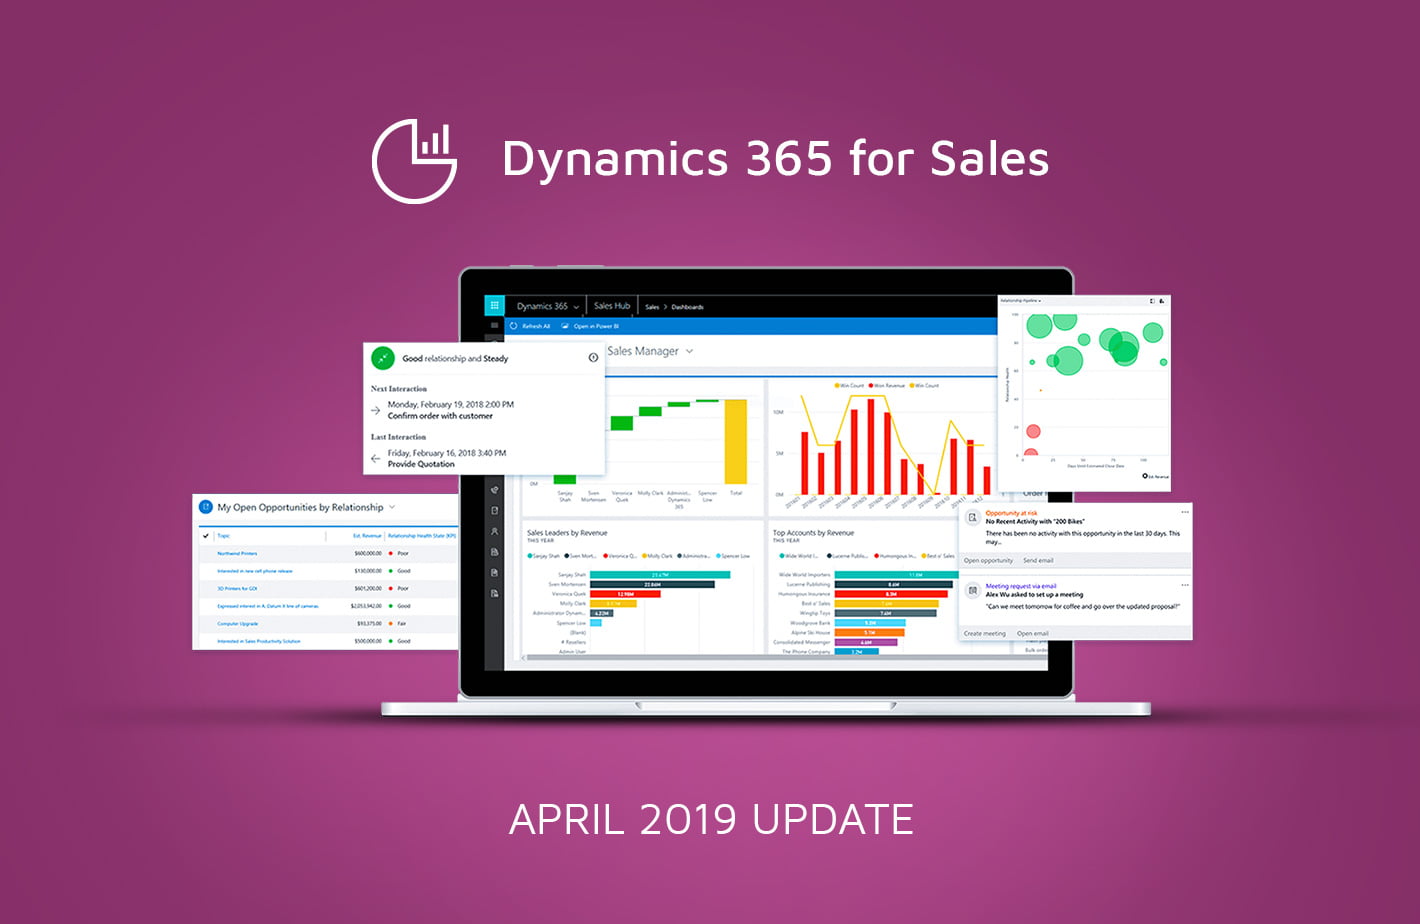 What's new in D365 for Sales April update